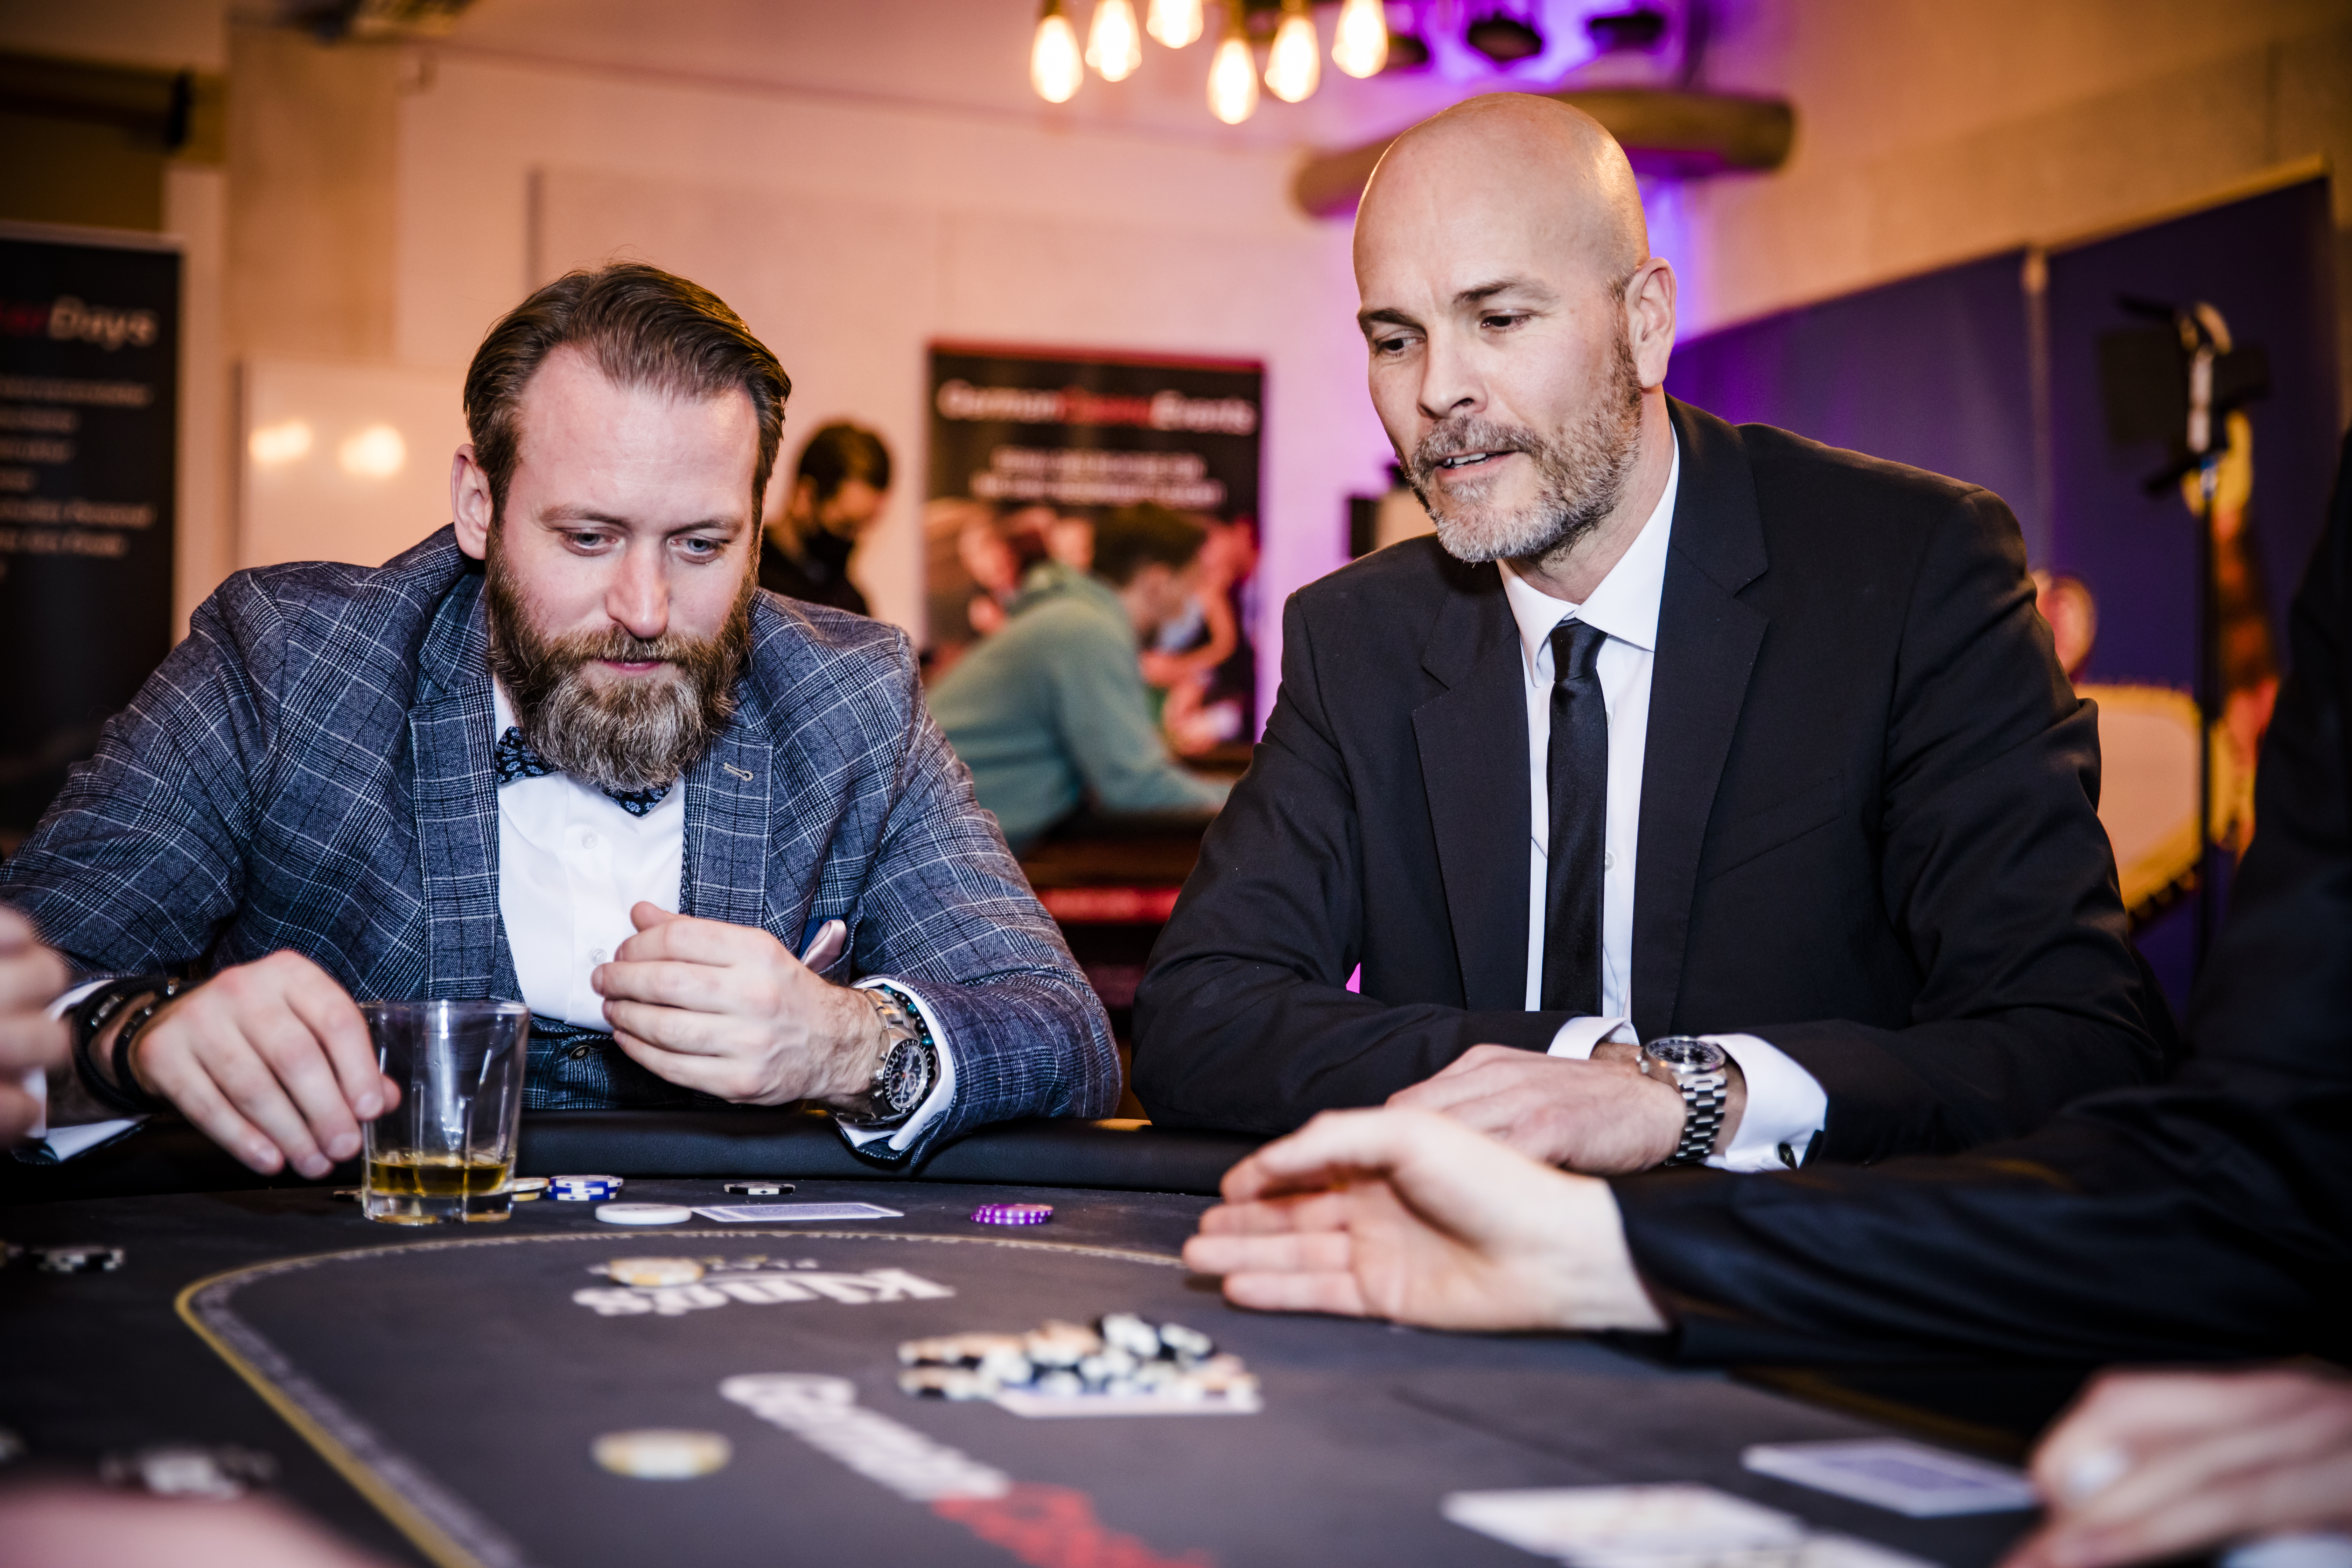 Community Freeroll Playstation 5 Special am 15.07.22 in Osnabrück – powered by GGPoker